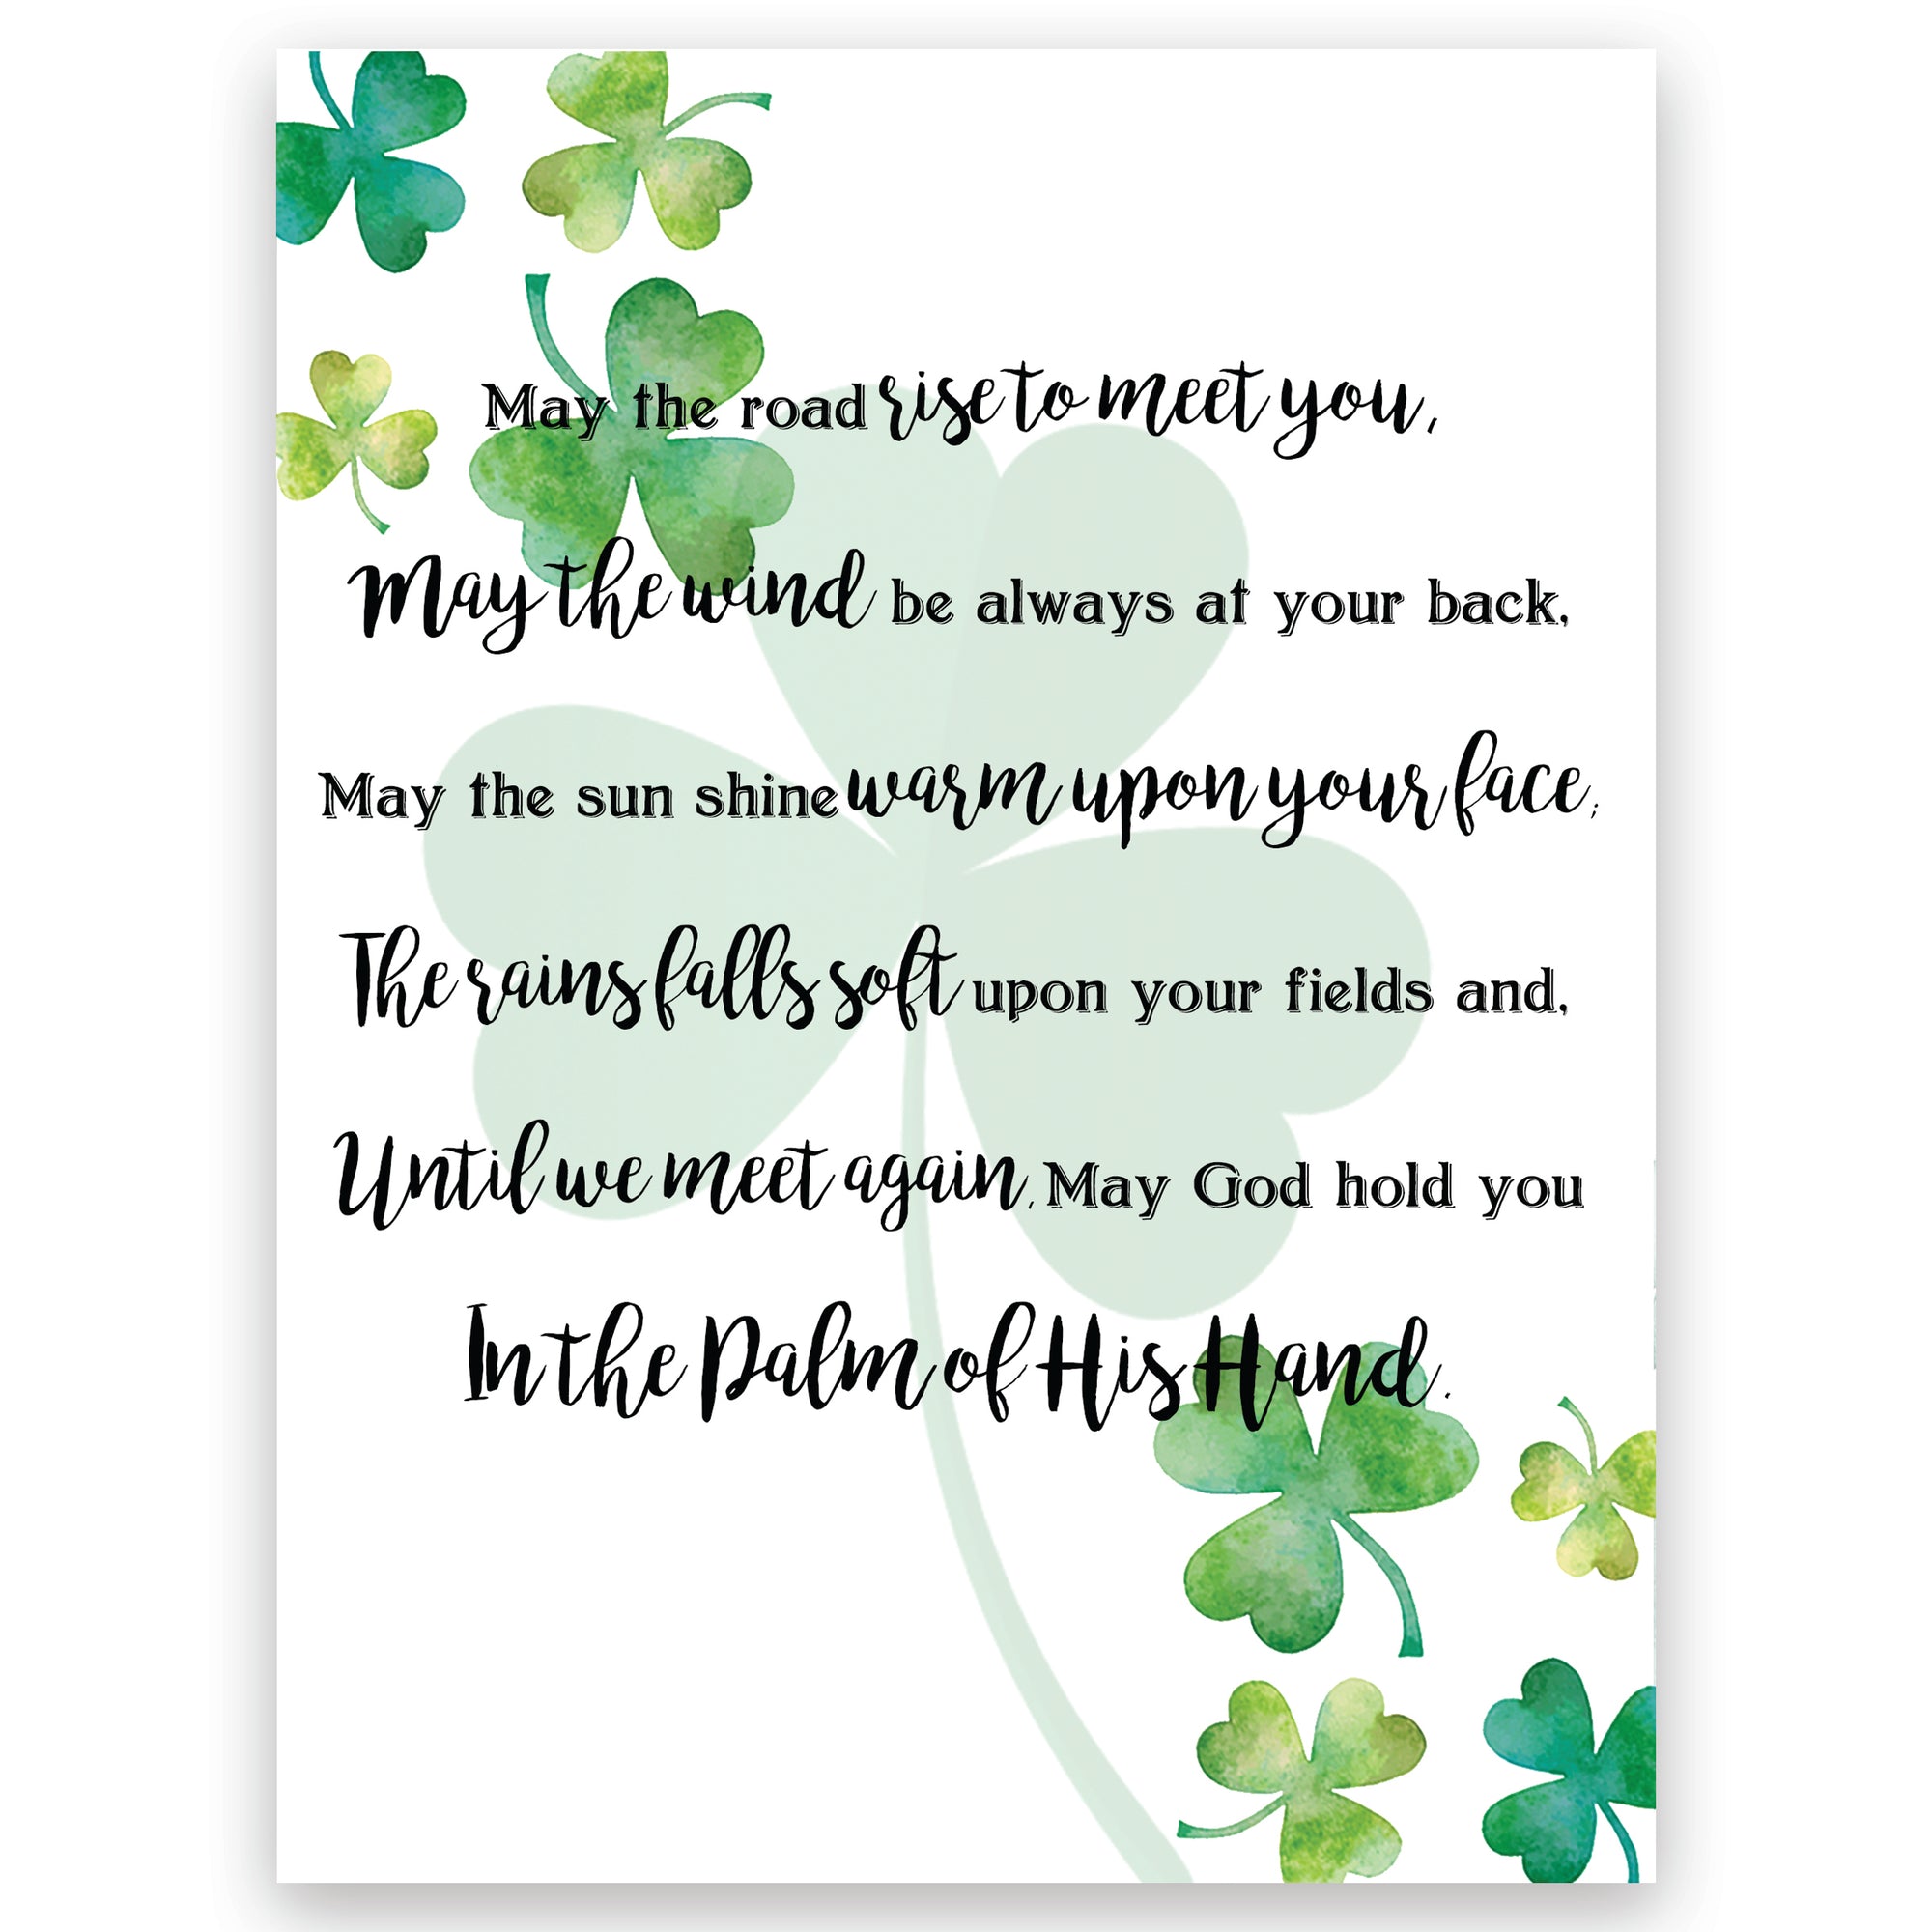 St. Patrick’s Day Irish Everyday Wooden Wall Plaque 6x8 - May The Road Rise